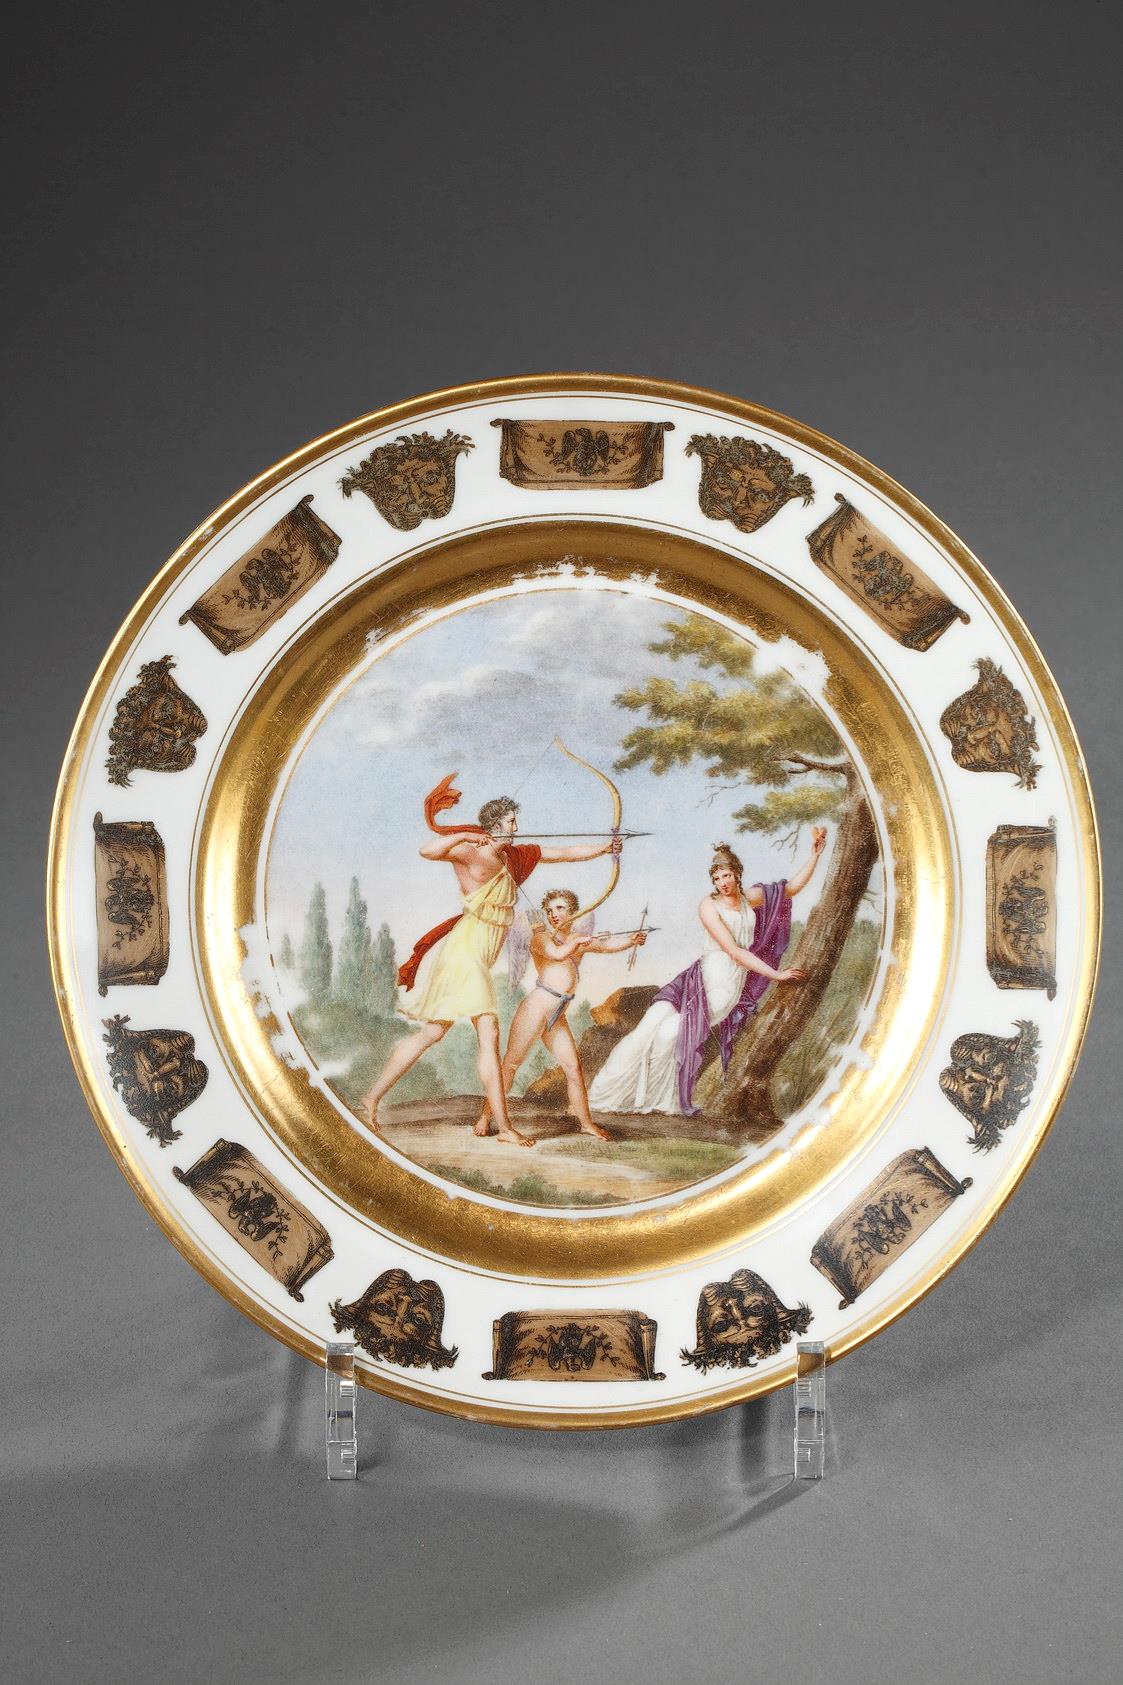 Empire plate by Stone, Coquerel and Legros in Paris.